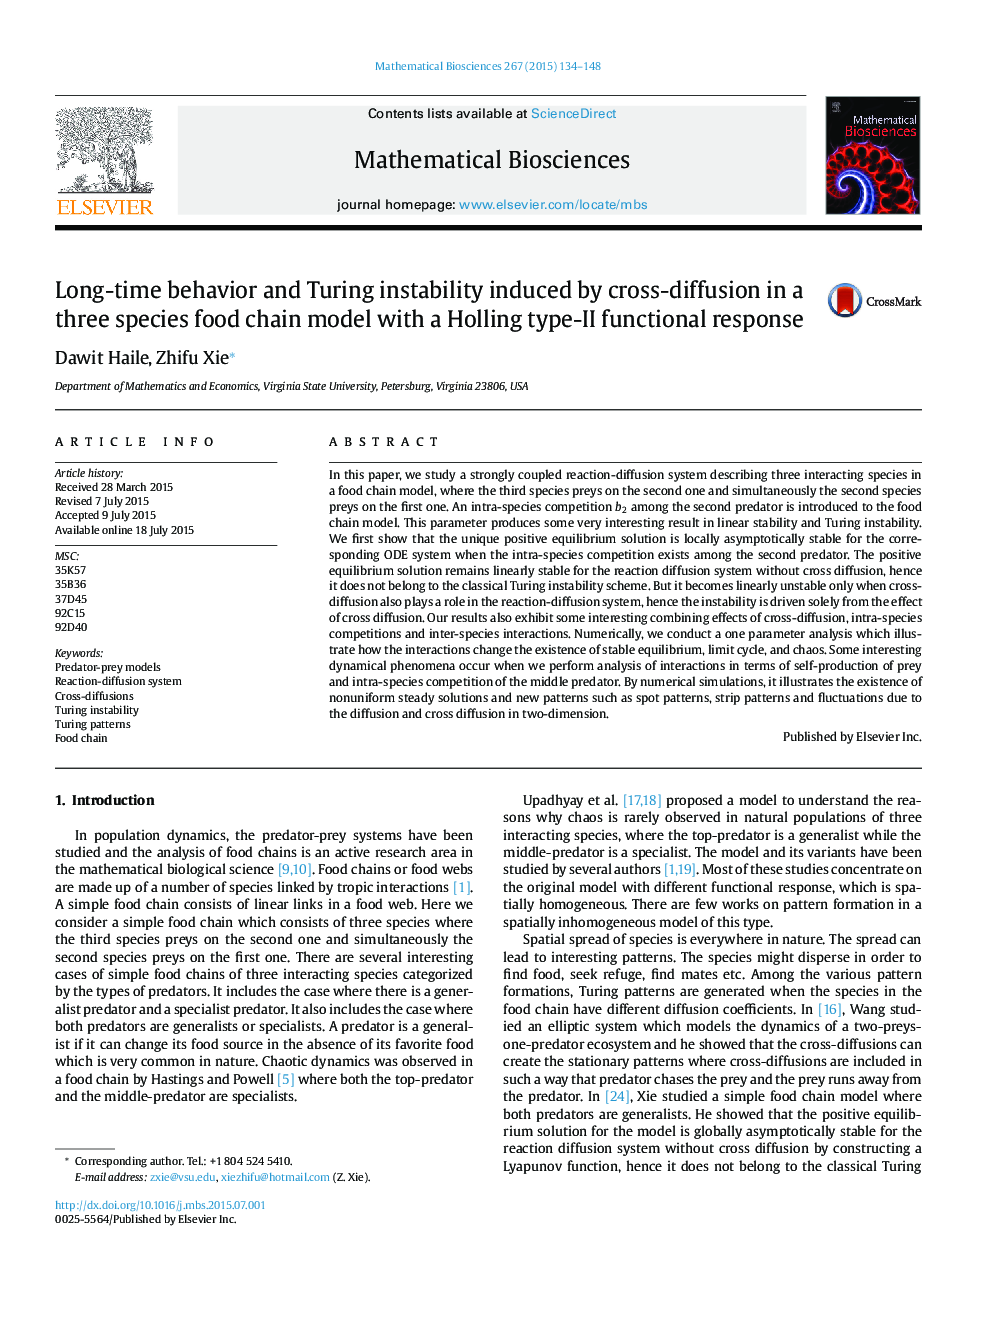 Long-time behavior and Turing instability induced by cross-diffusion in a three species food chain model with a Holling type-II functional response